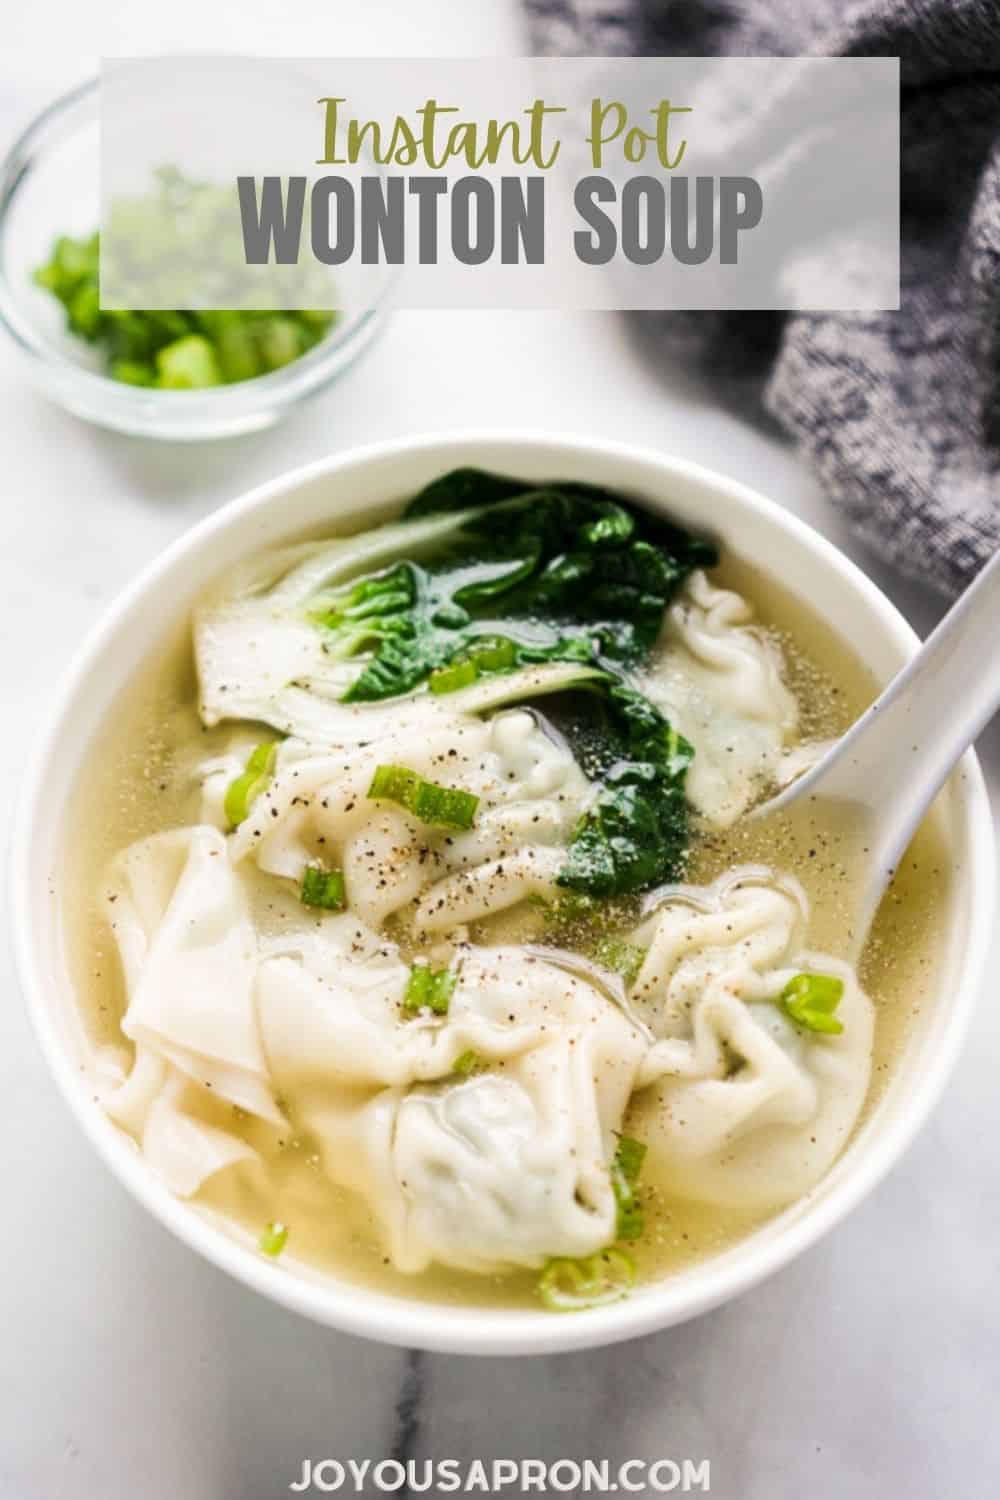 Wonton Soup - the classic Chinese and Asian soup made in the Instant Pot, and using frozen wontons! Easy, quick and yum! Juicy wontons submerged in flavorful seasoned chicken broth, combine with veggies. Cozy and comforting. via @joyousapron